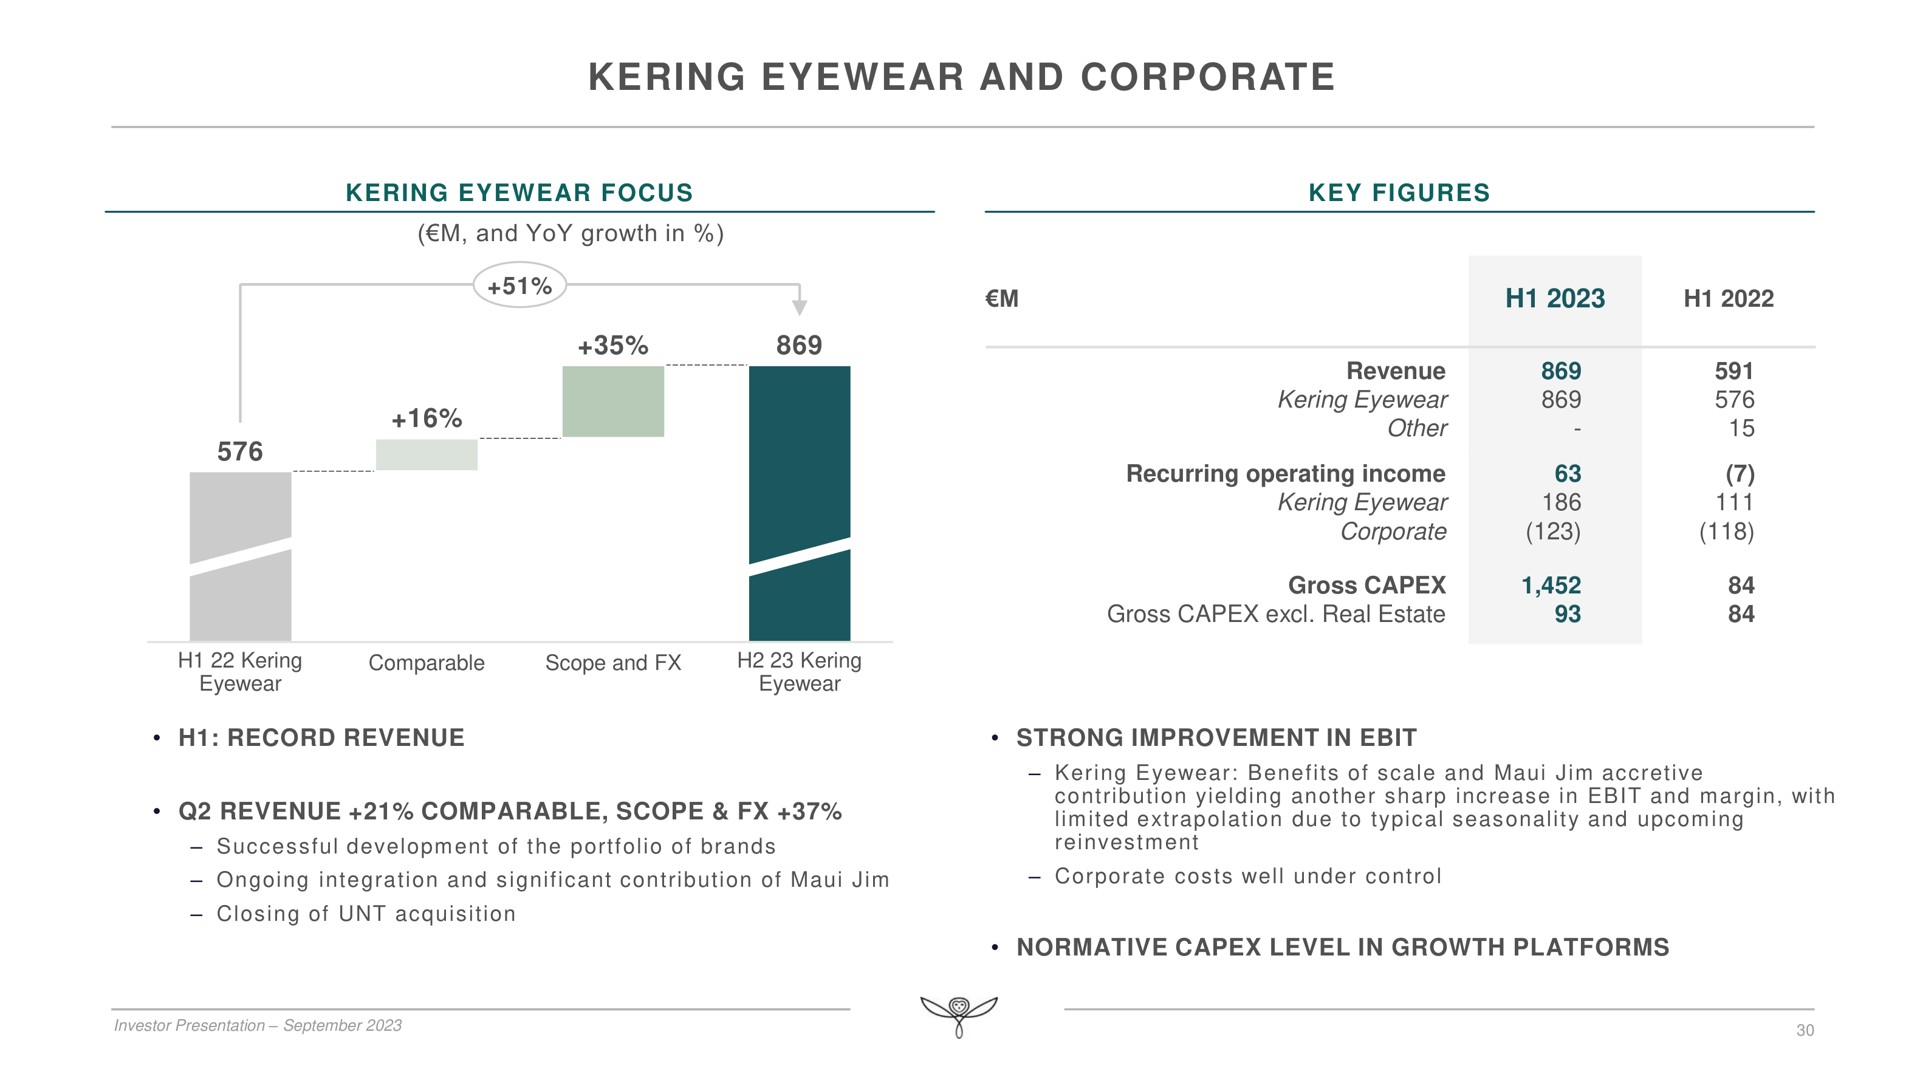 eyewear and corporate other | Kering